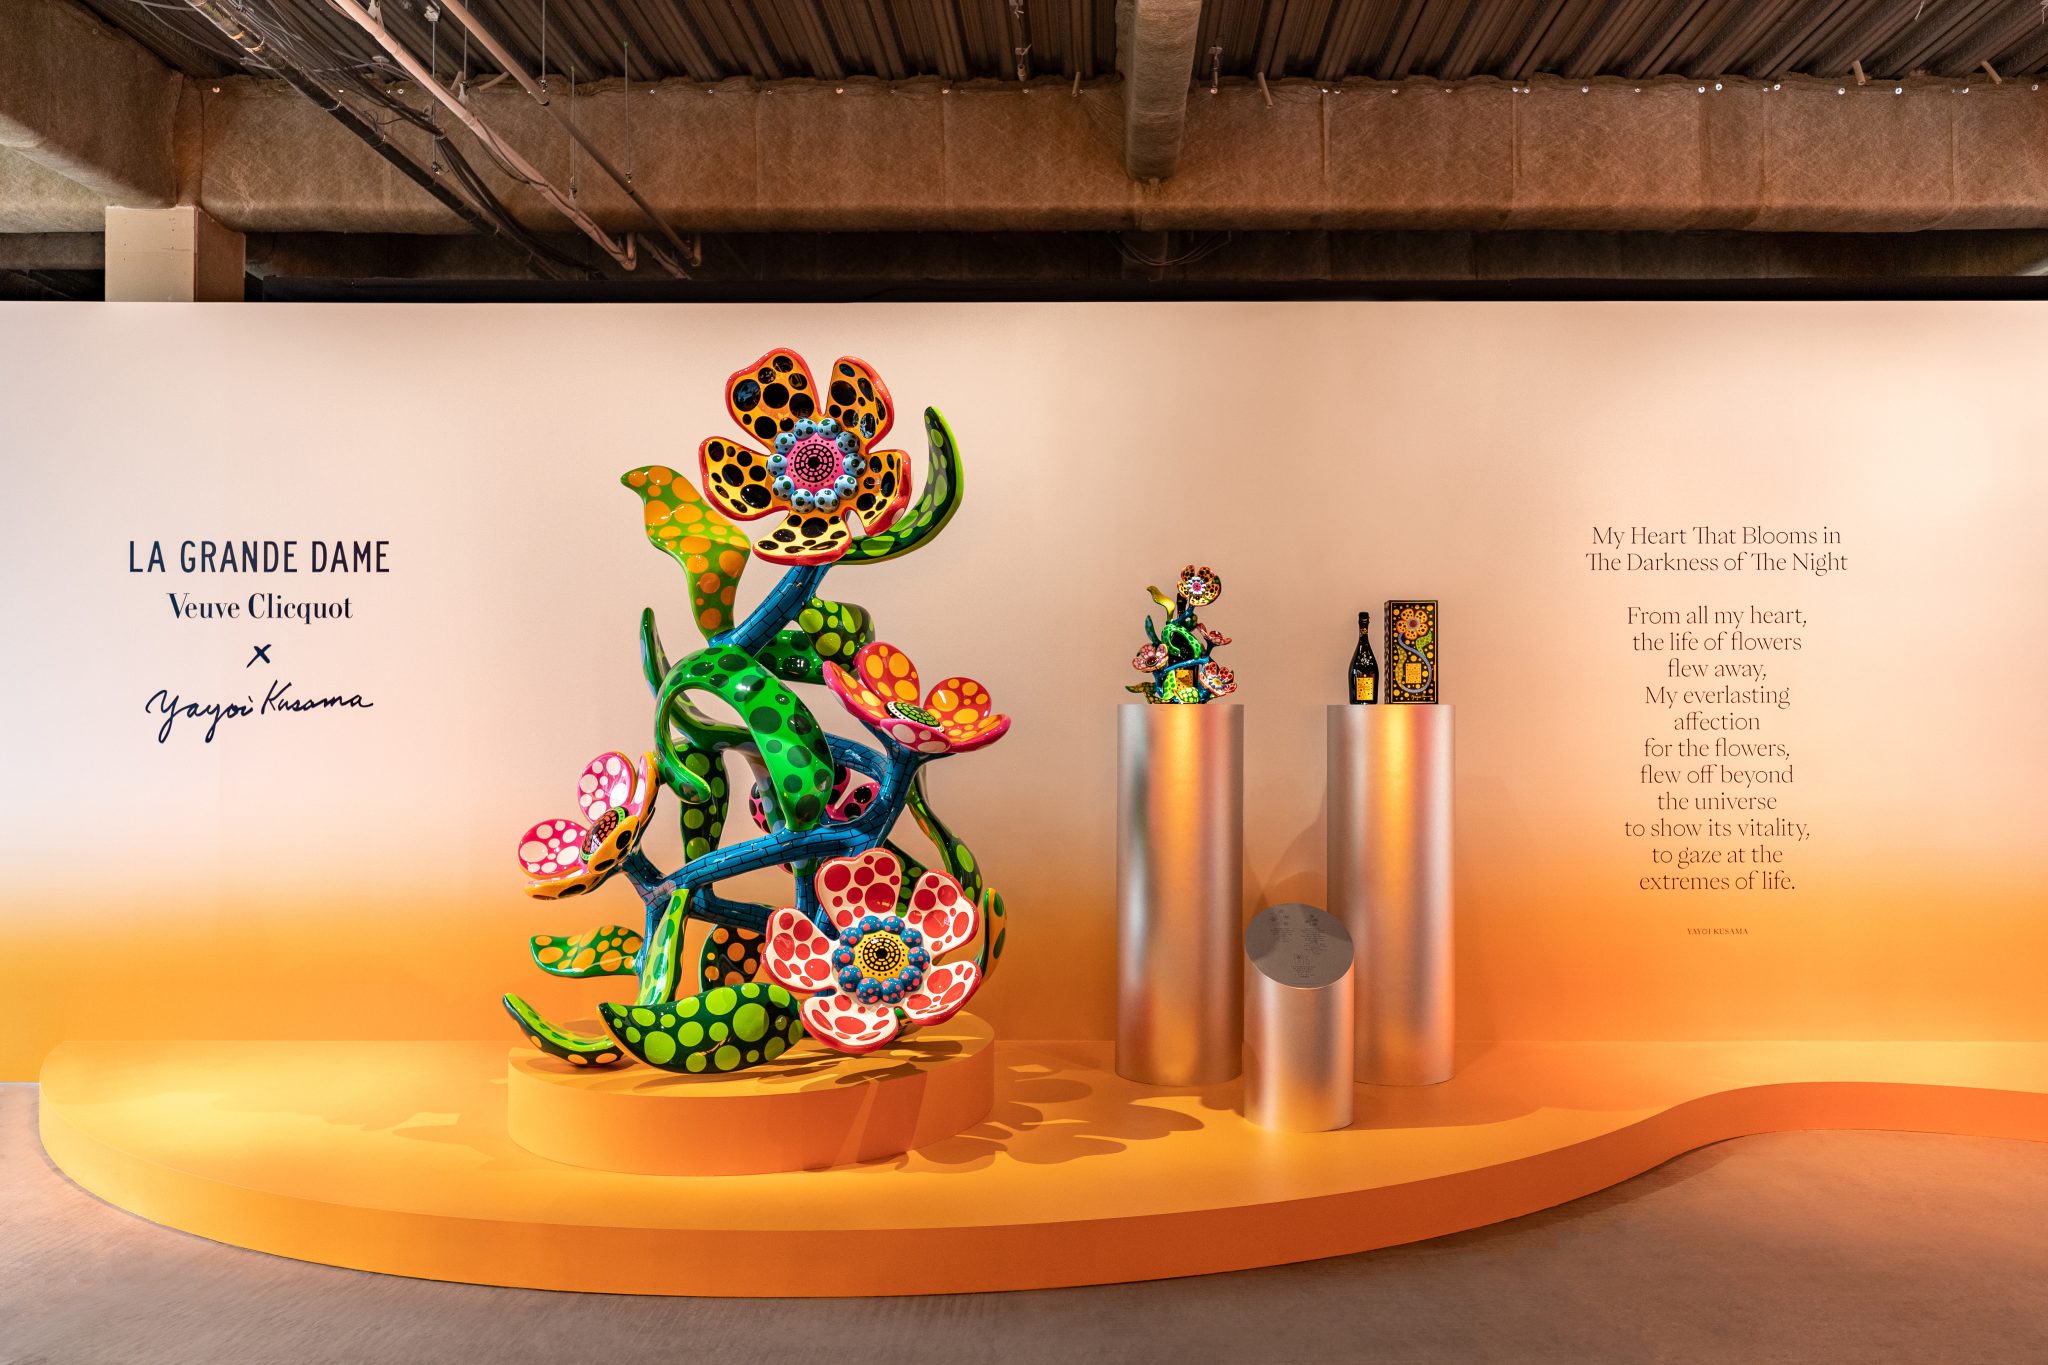 Veuve Clicquot brings 250 year anniversary exhibition to London